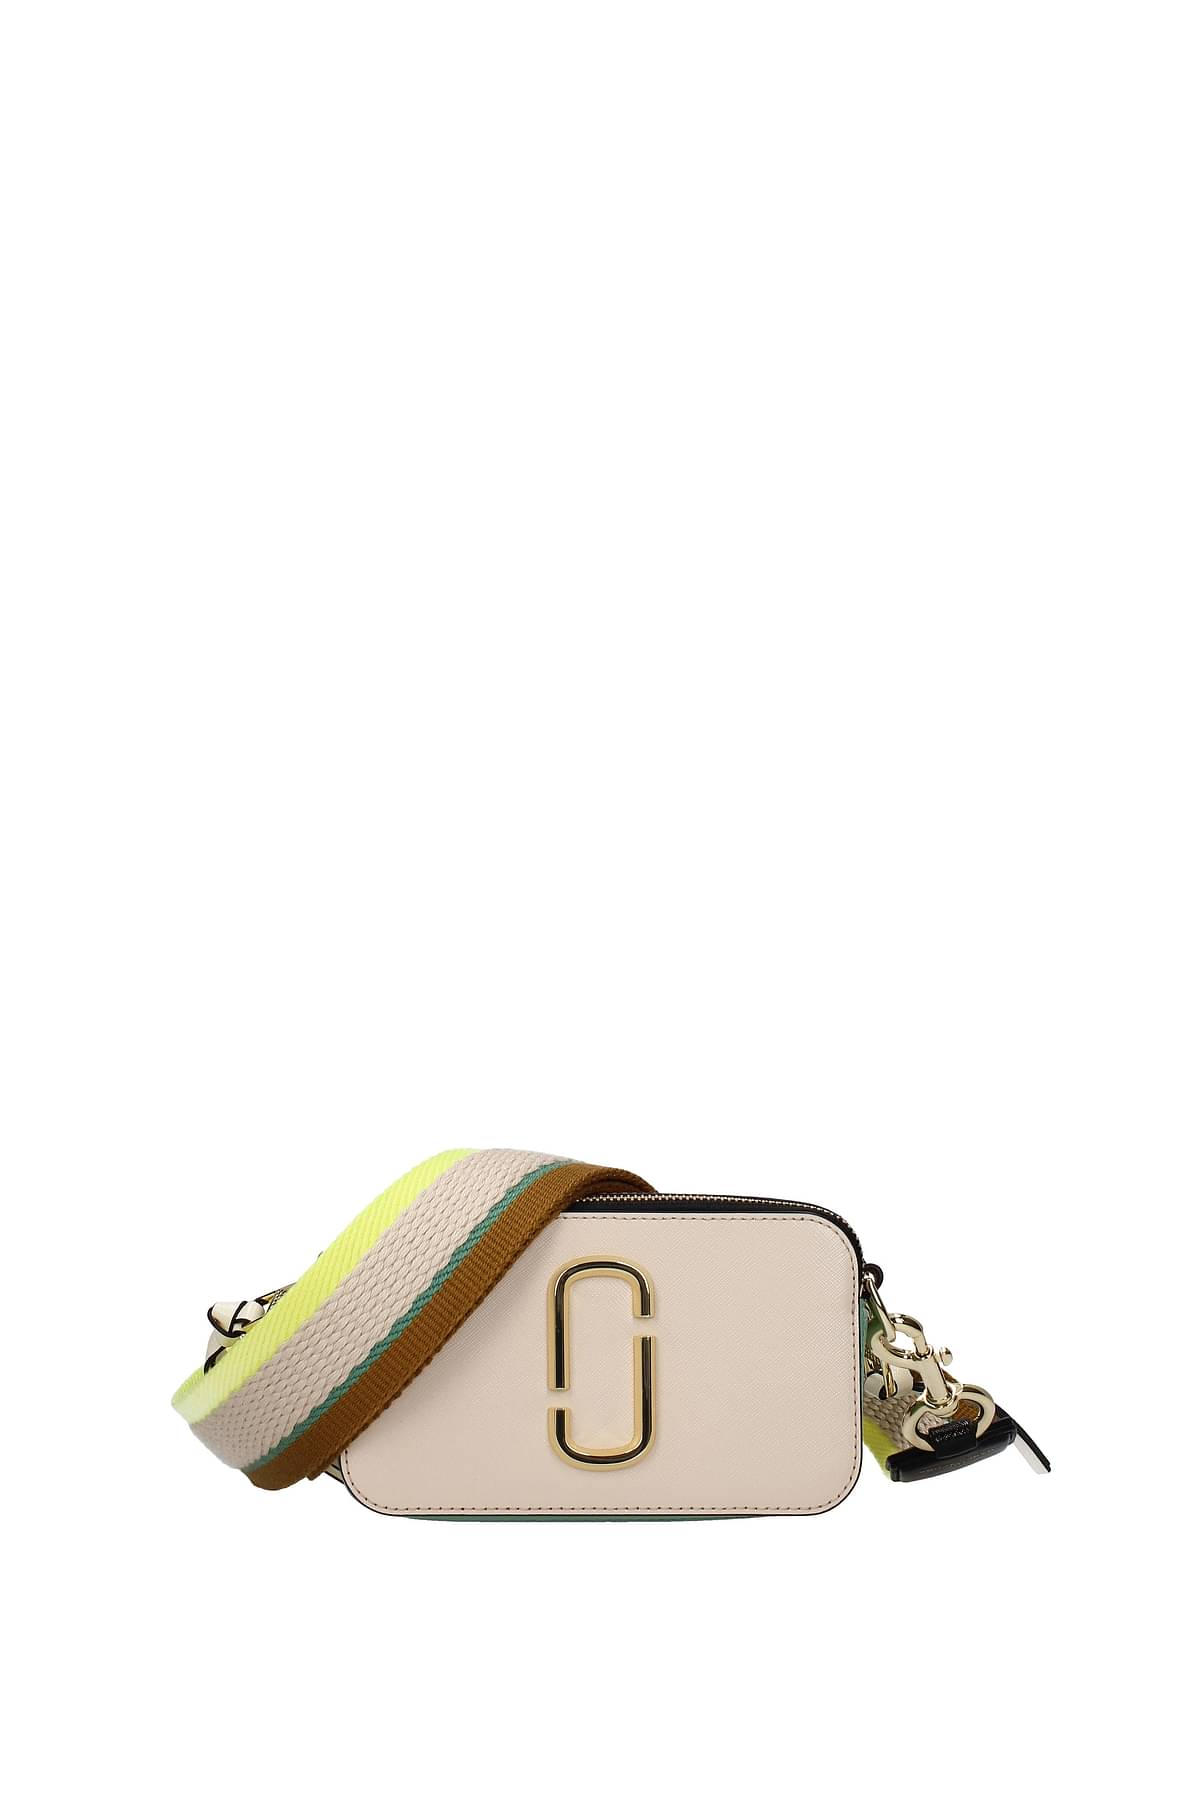 Snapshot of Marc Jacobs - Yellow, beige, taupe bag made of leather with  shoulder strap for women